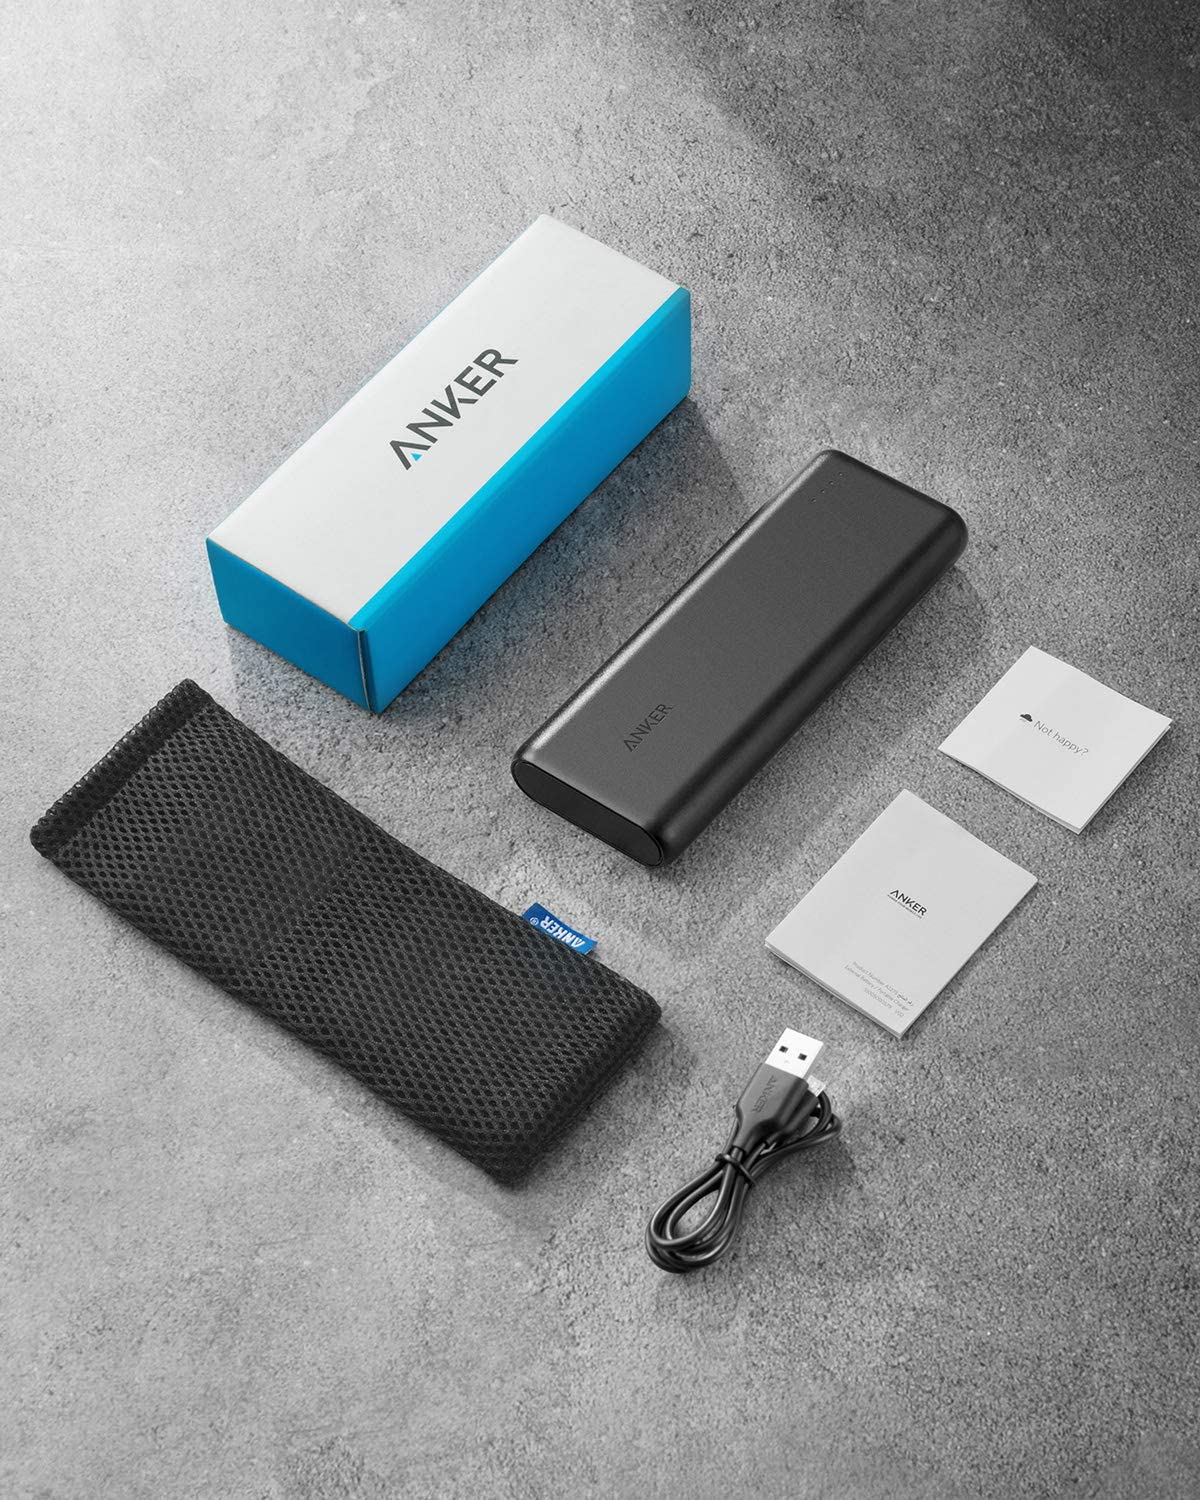 Anker PowerCore 20100mAh Portable Charger Power Bank